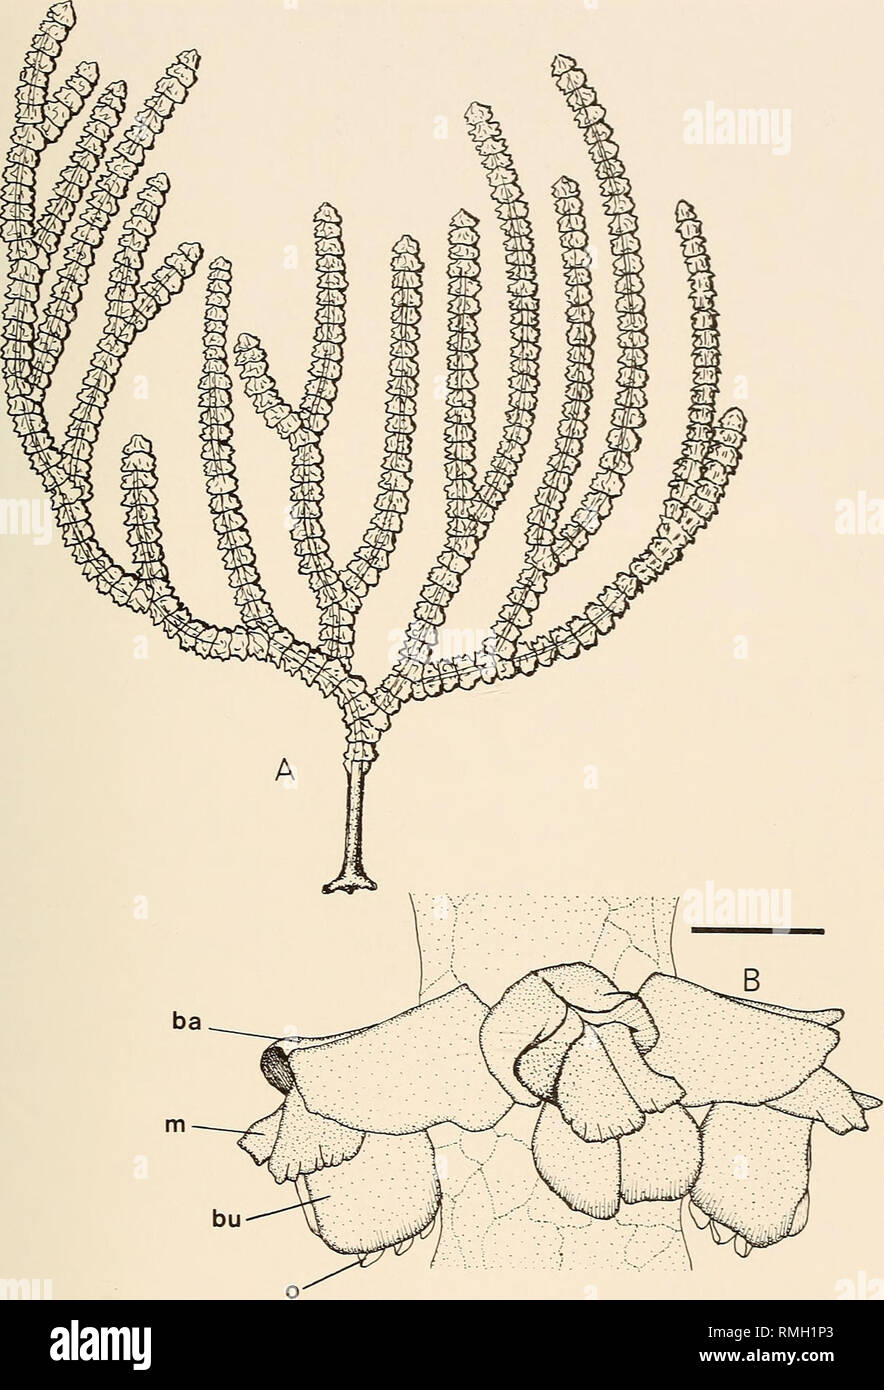 . Annals of the South African Museum = Annale van die Suid-Afrikaanse Museum. Natural history. GORGONIAN OCTOCORALS OF SOUTHERN AFRICA 273. Fig. 63. Narella gilchristi (Thomson, 1911). A. An entire colony, 150 mm in height. B. Detail of a group of three polyps; scale bar = 1,0 mm. Abbreviations: ba—basal scale, bu—buccal scale, m—medial scale, o—opercular scale. ance. Colony scales 0,65-2,0 mm in length. Colony colour pink in life, fading to white in alcohol. Distribution East London to Cape Vidal, northern Natal, 90-340 m in depth (Williams in press a). Type locality is Cape Vidal.. Please no Stock Photo